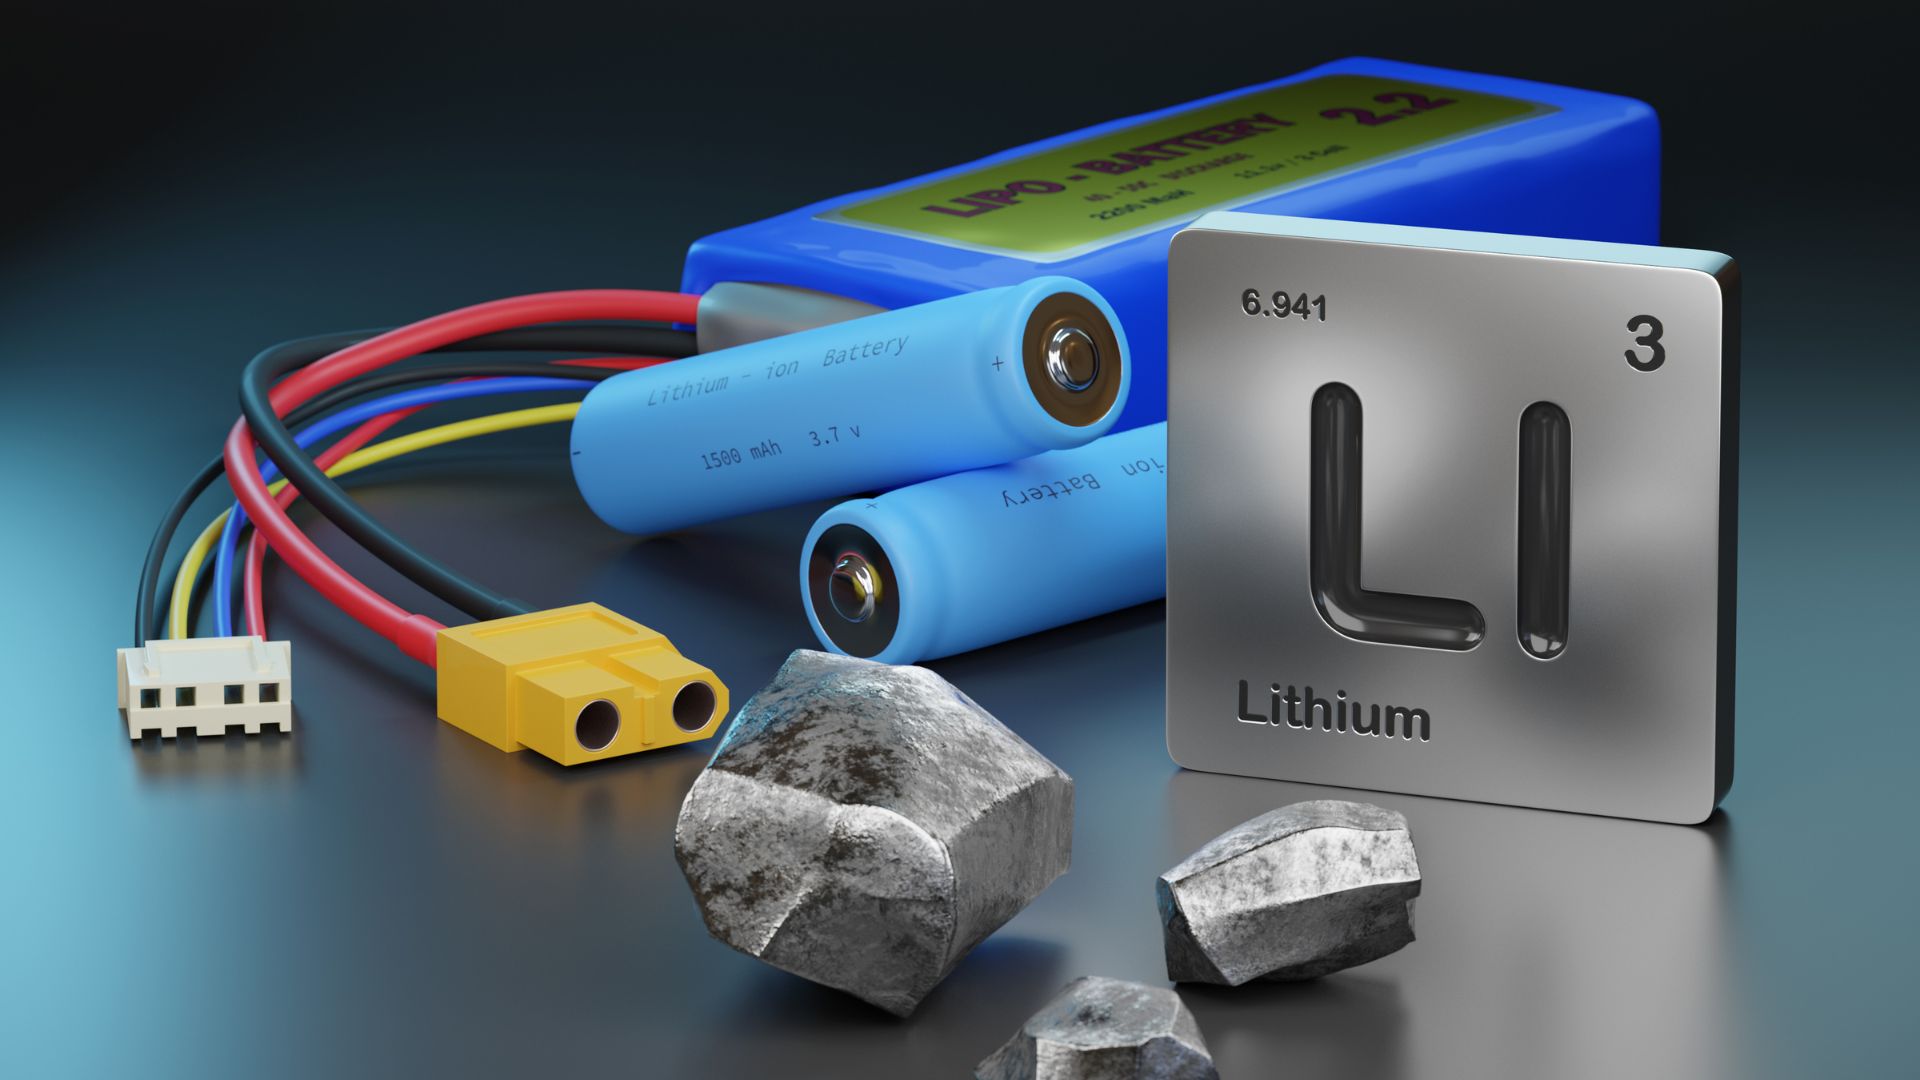 https://e-vehicleinfo.com/global/top-8-lithium-reserves-countries-in-the-world/